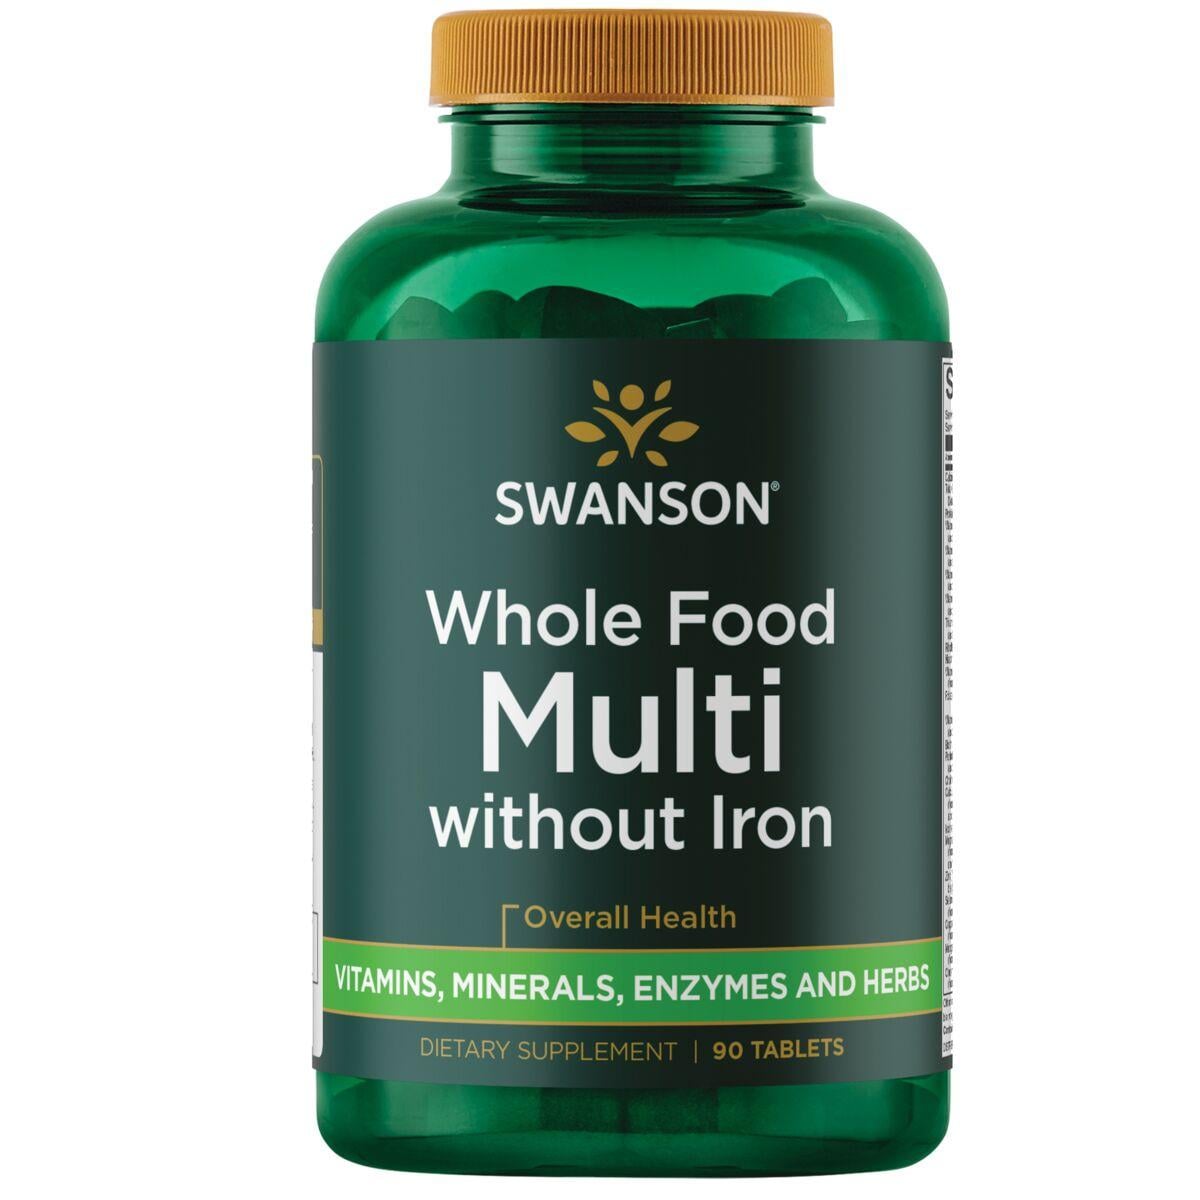 Swanson Ultra Whole Food Multi without Iron Vitamin | 90 Tabs | Womens Health